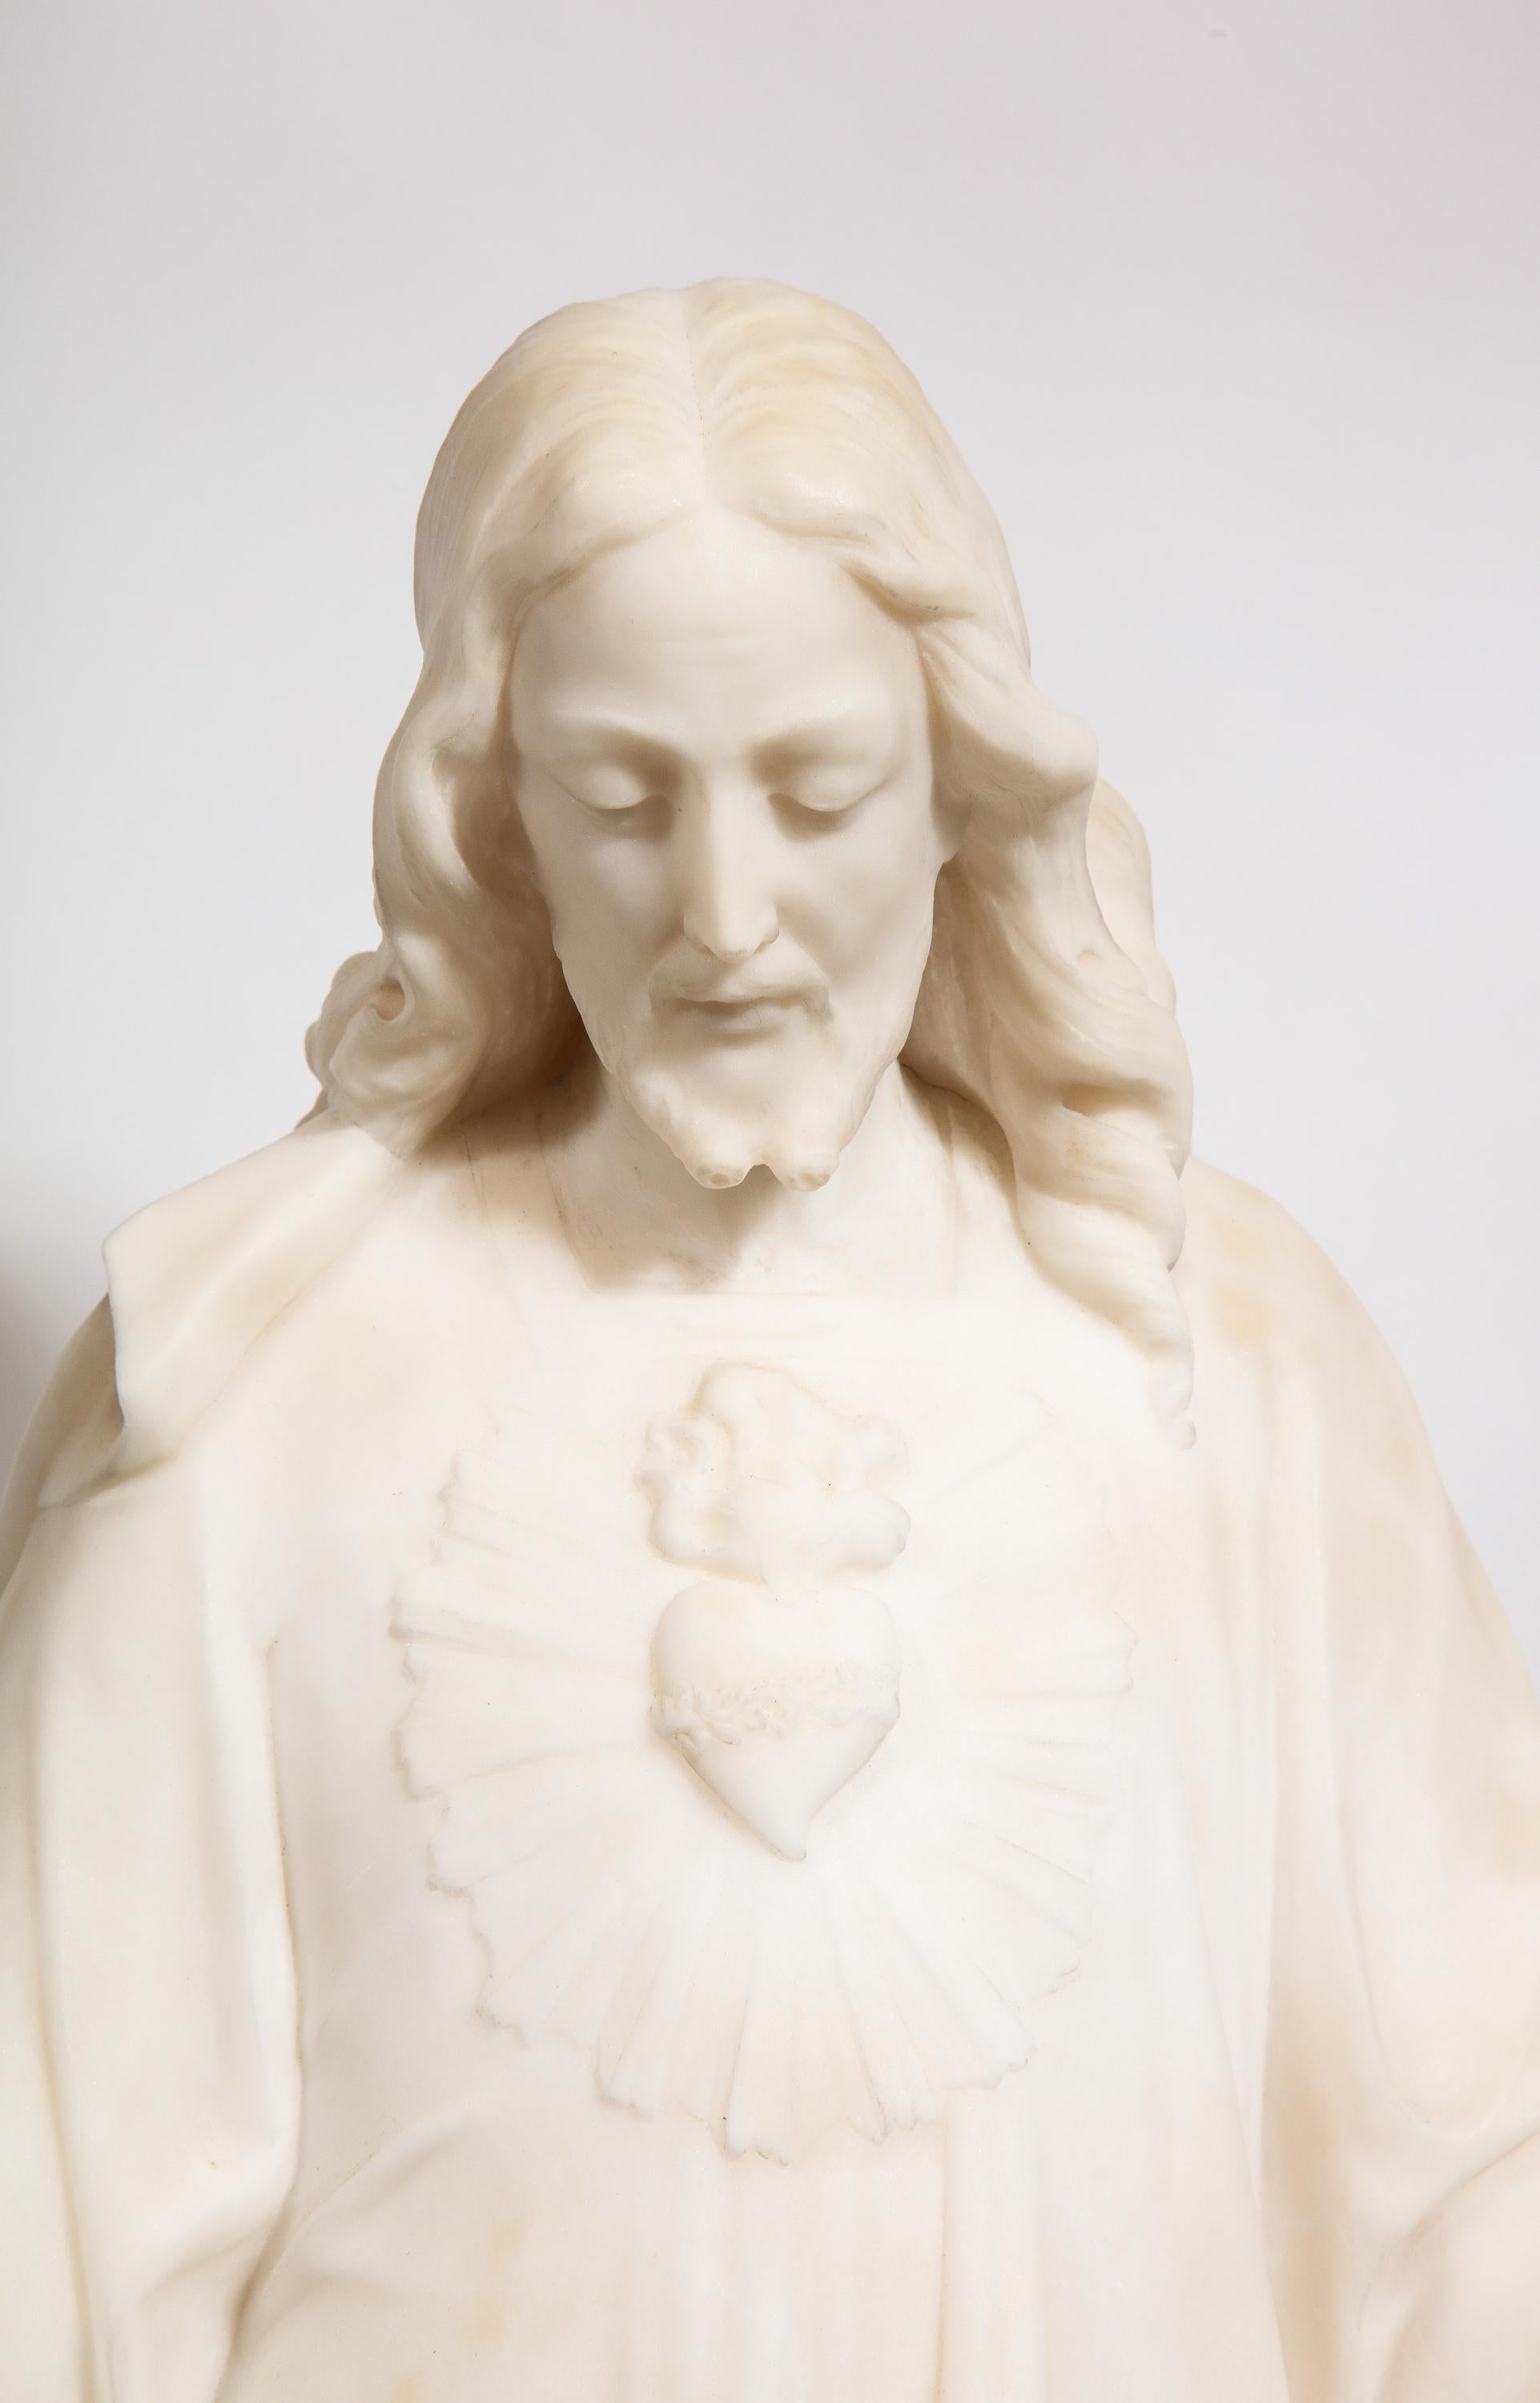 Carrara Marble Museum Quality Italian Marble Sculpture of Holy Jesus Christ, 19th Century